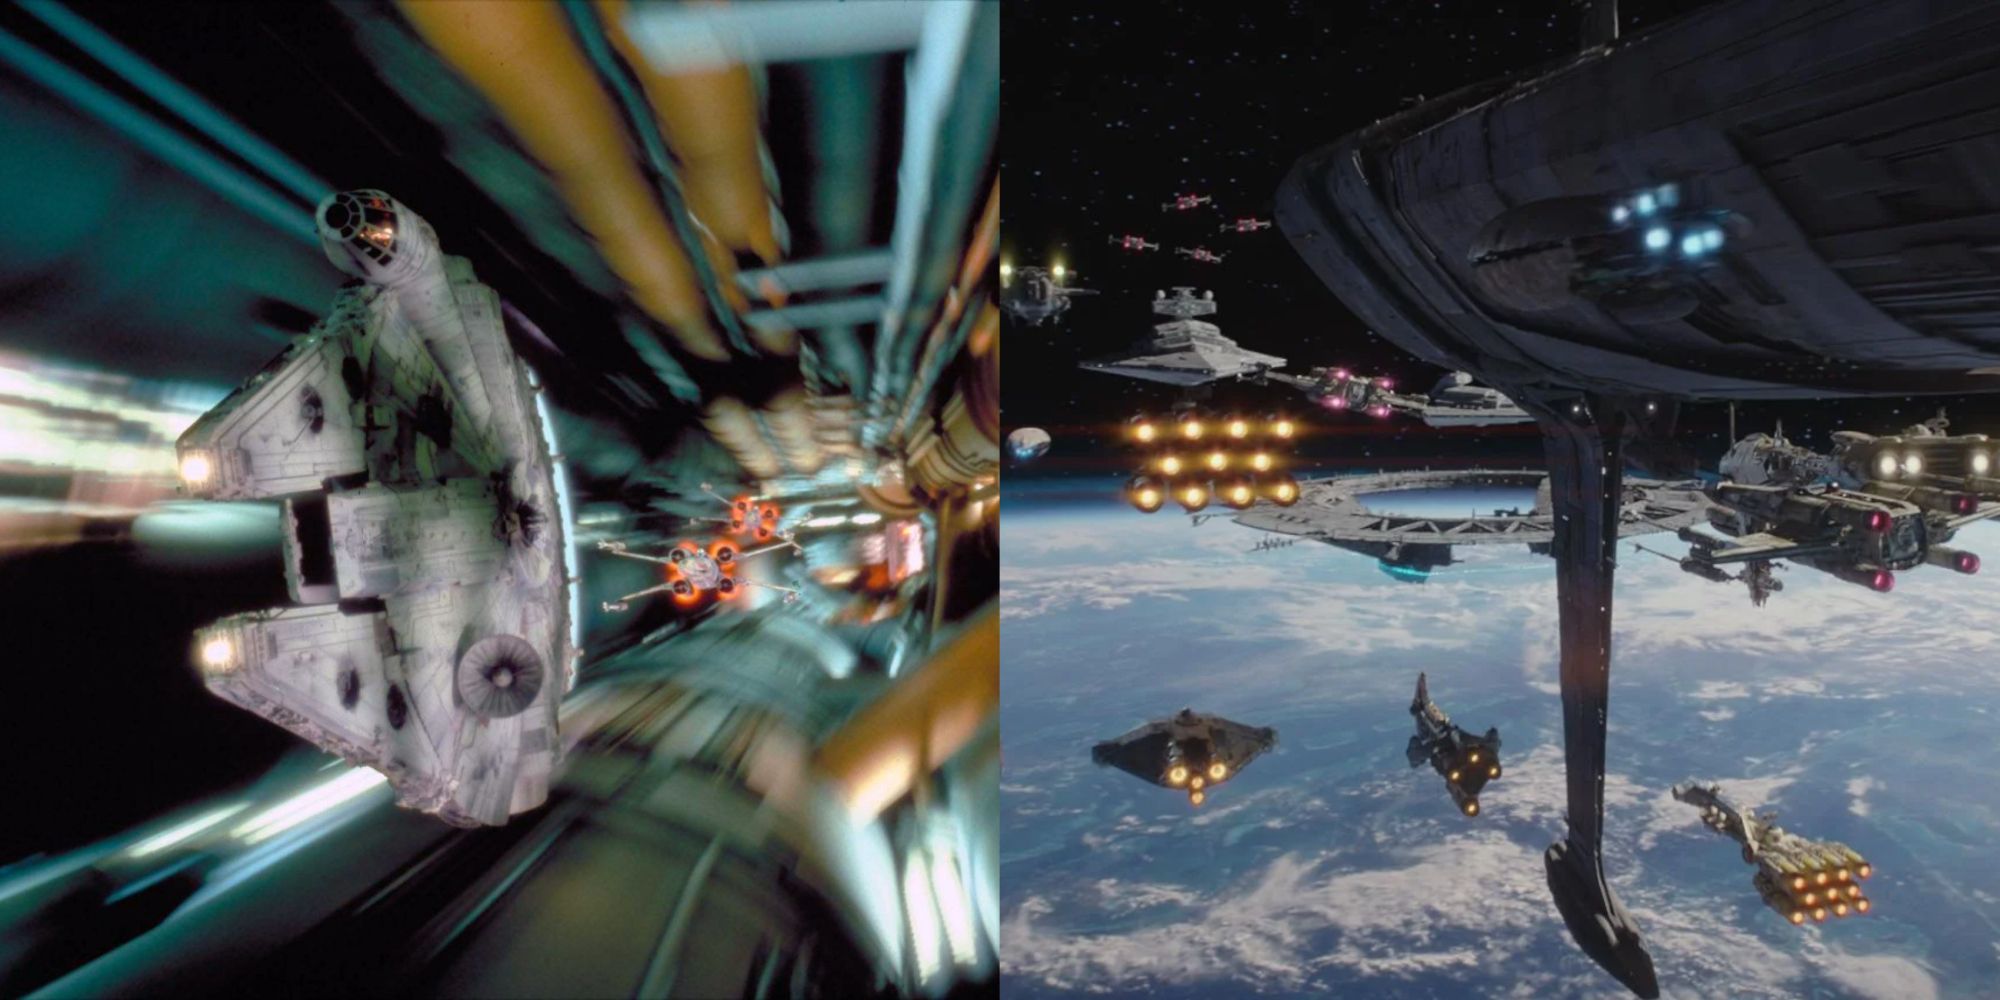 Split image of Rebel ships flying inside the Death Star 2 from Return of the Jedi and arriving at Scarif in Rogue One.